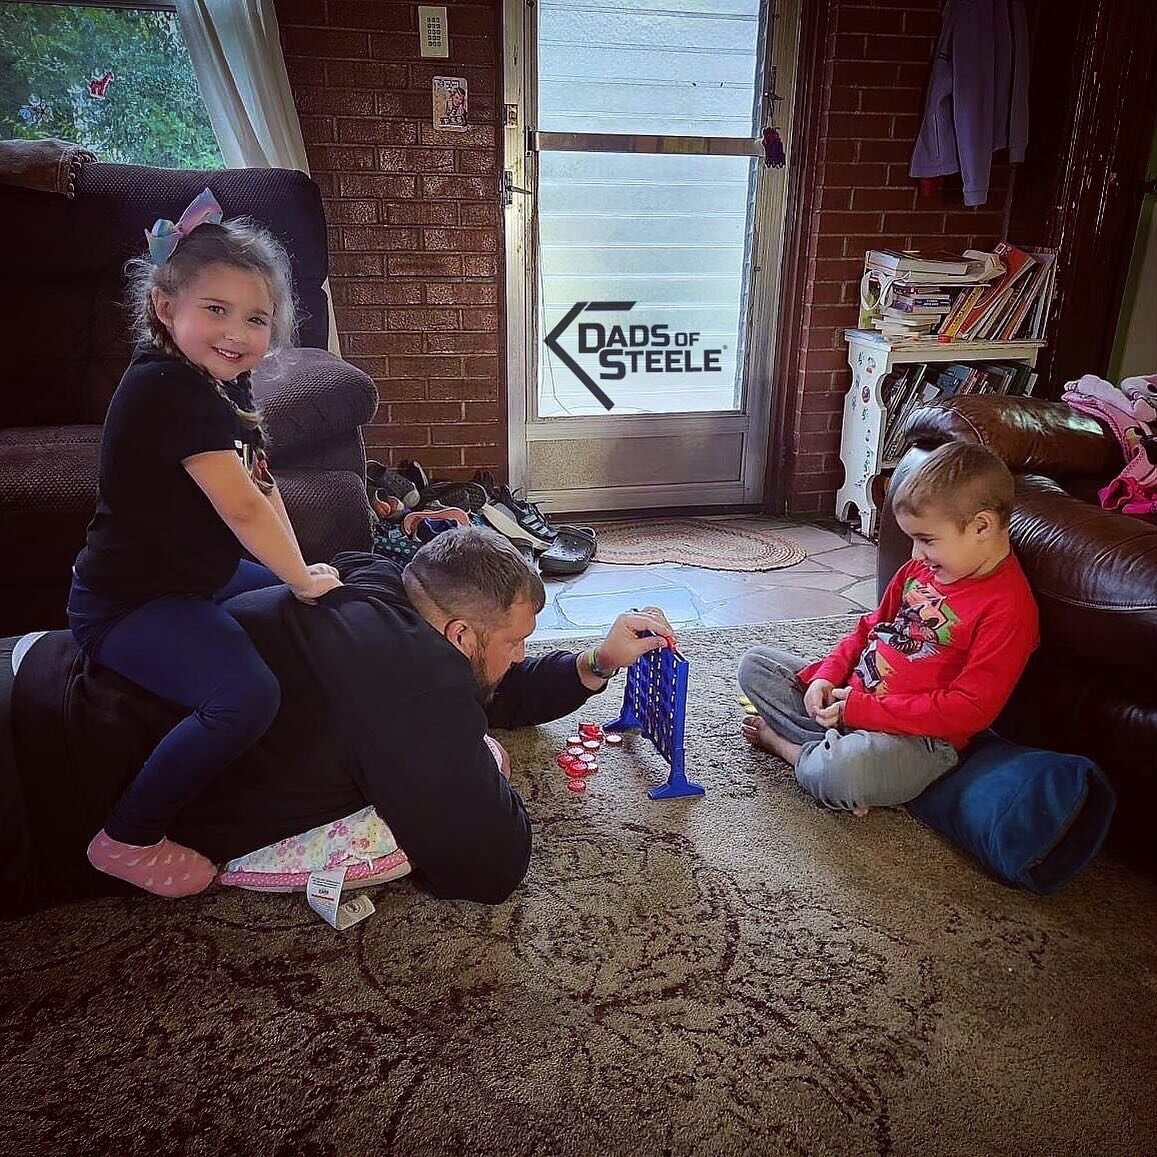 @mccalla65 and his kids playing Connect 4. #dadlife #dads #gamenight #funwithkids#dadsofsteele